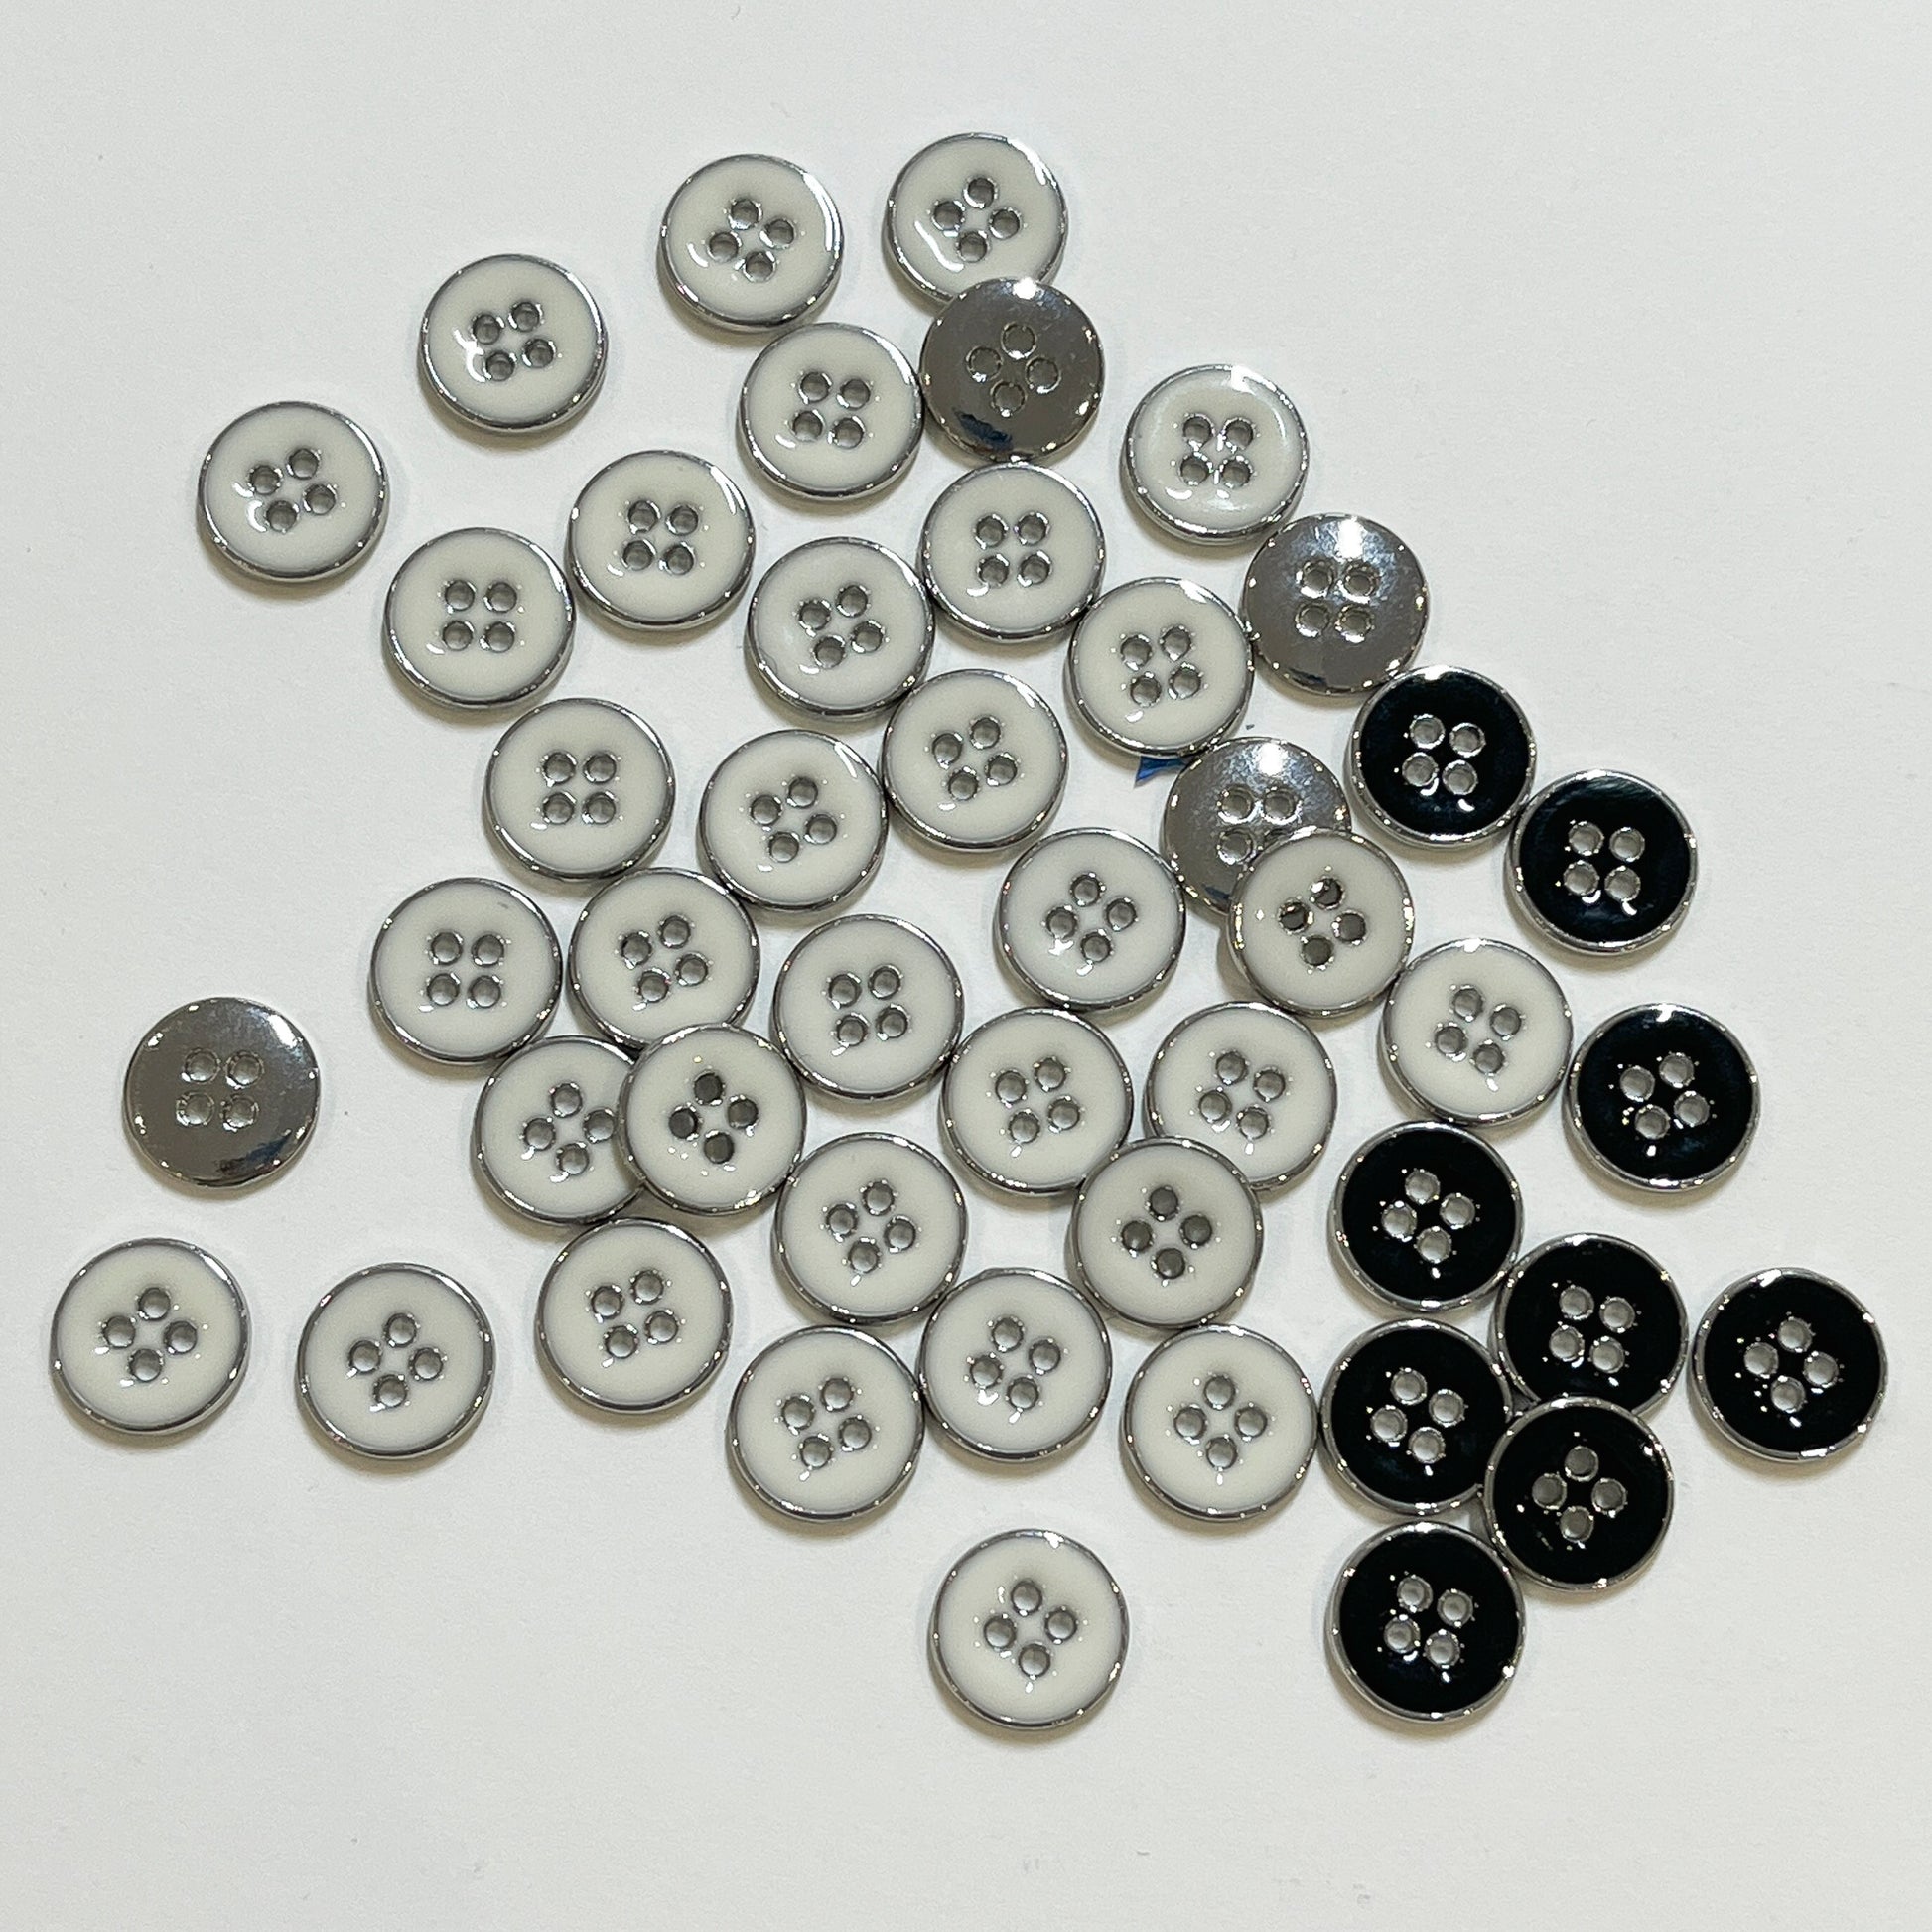 4 hole enamelled shirt buttons. The enamel sits inside a silver polished casing